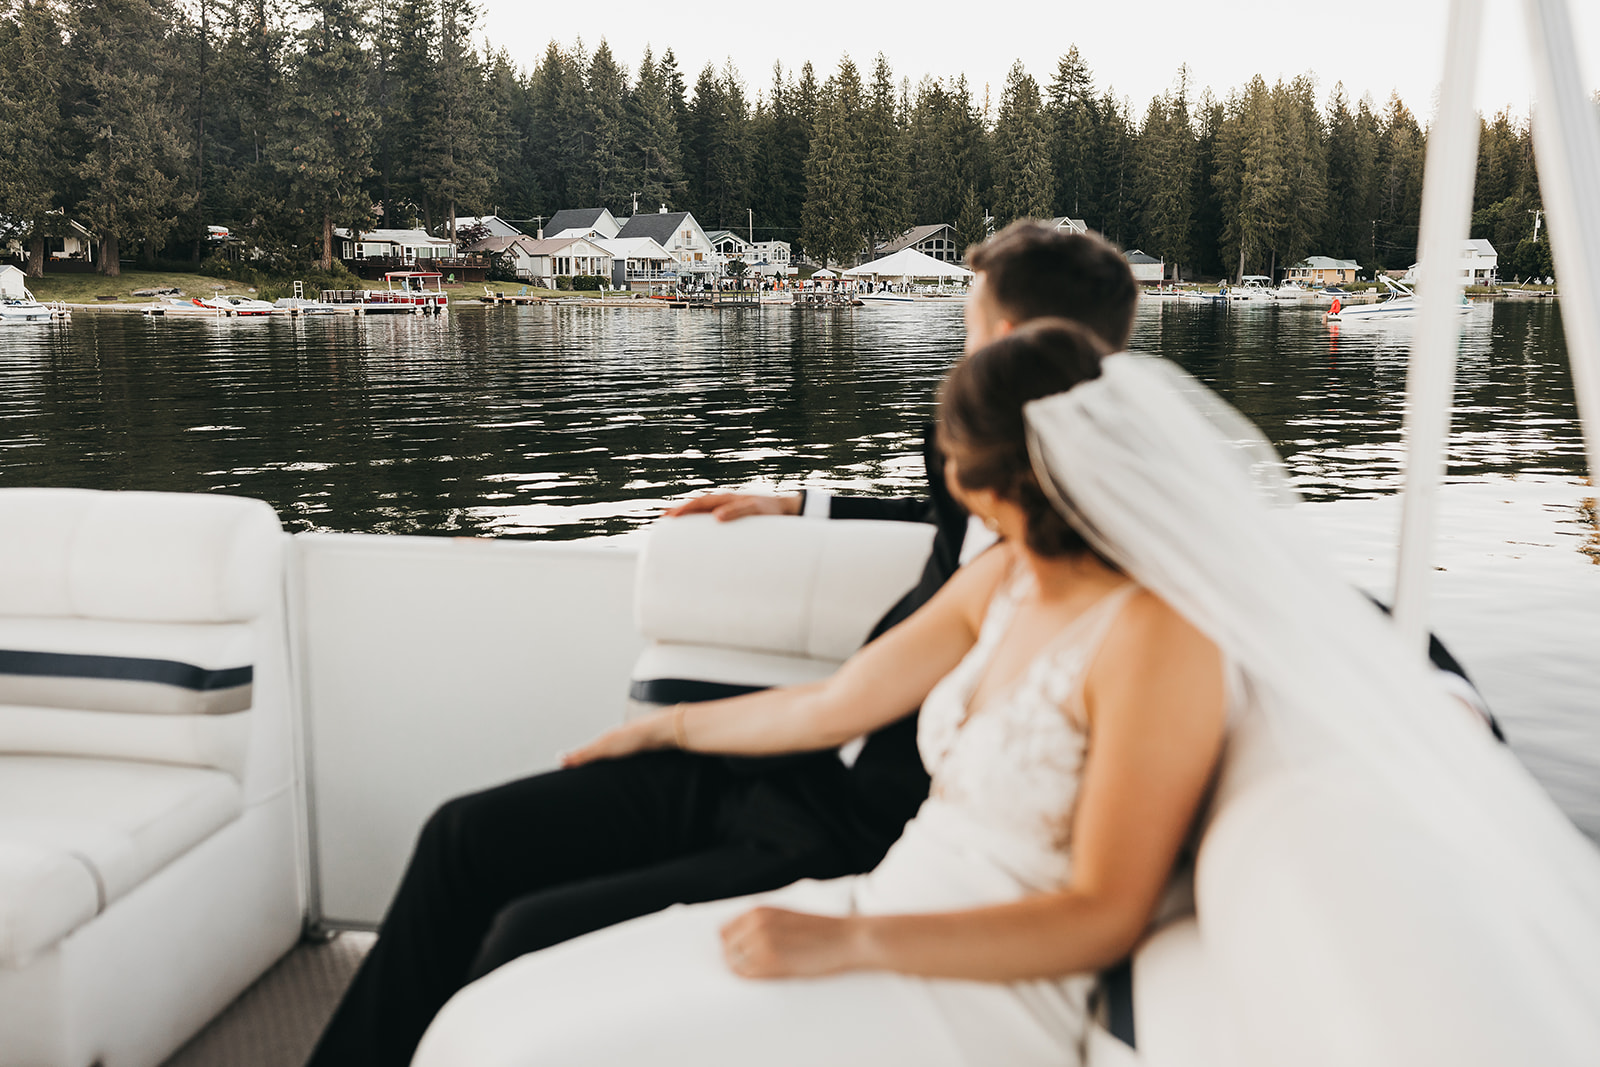 Bride and groom riding around on the family pontoon boat at private lake house wedding.